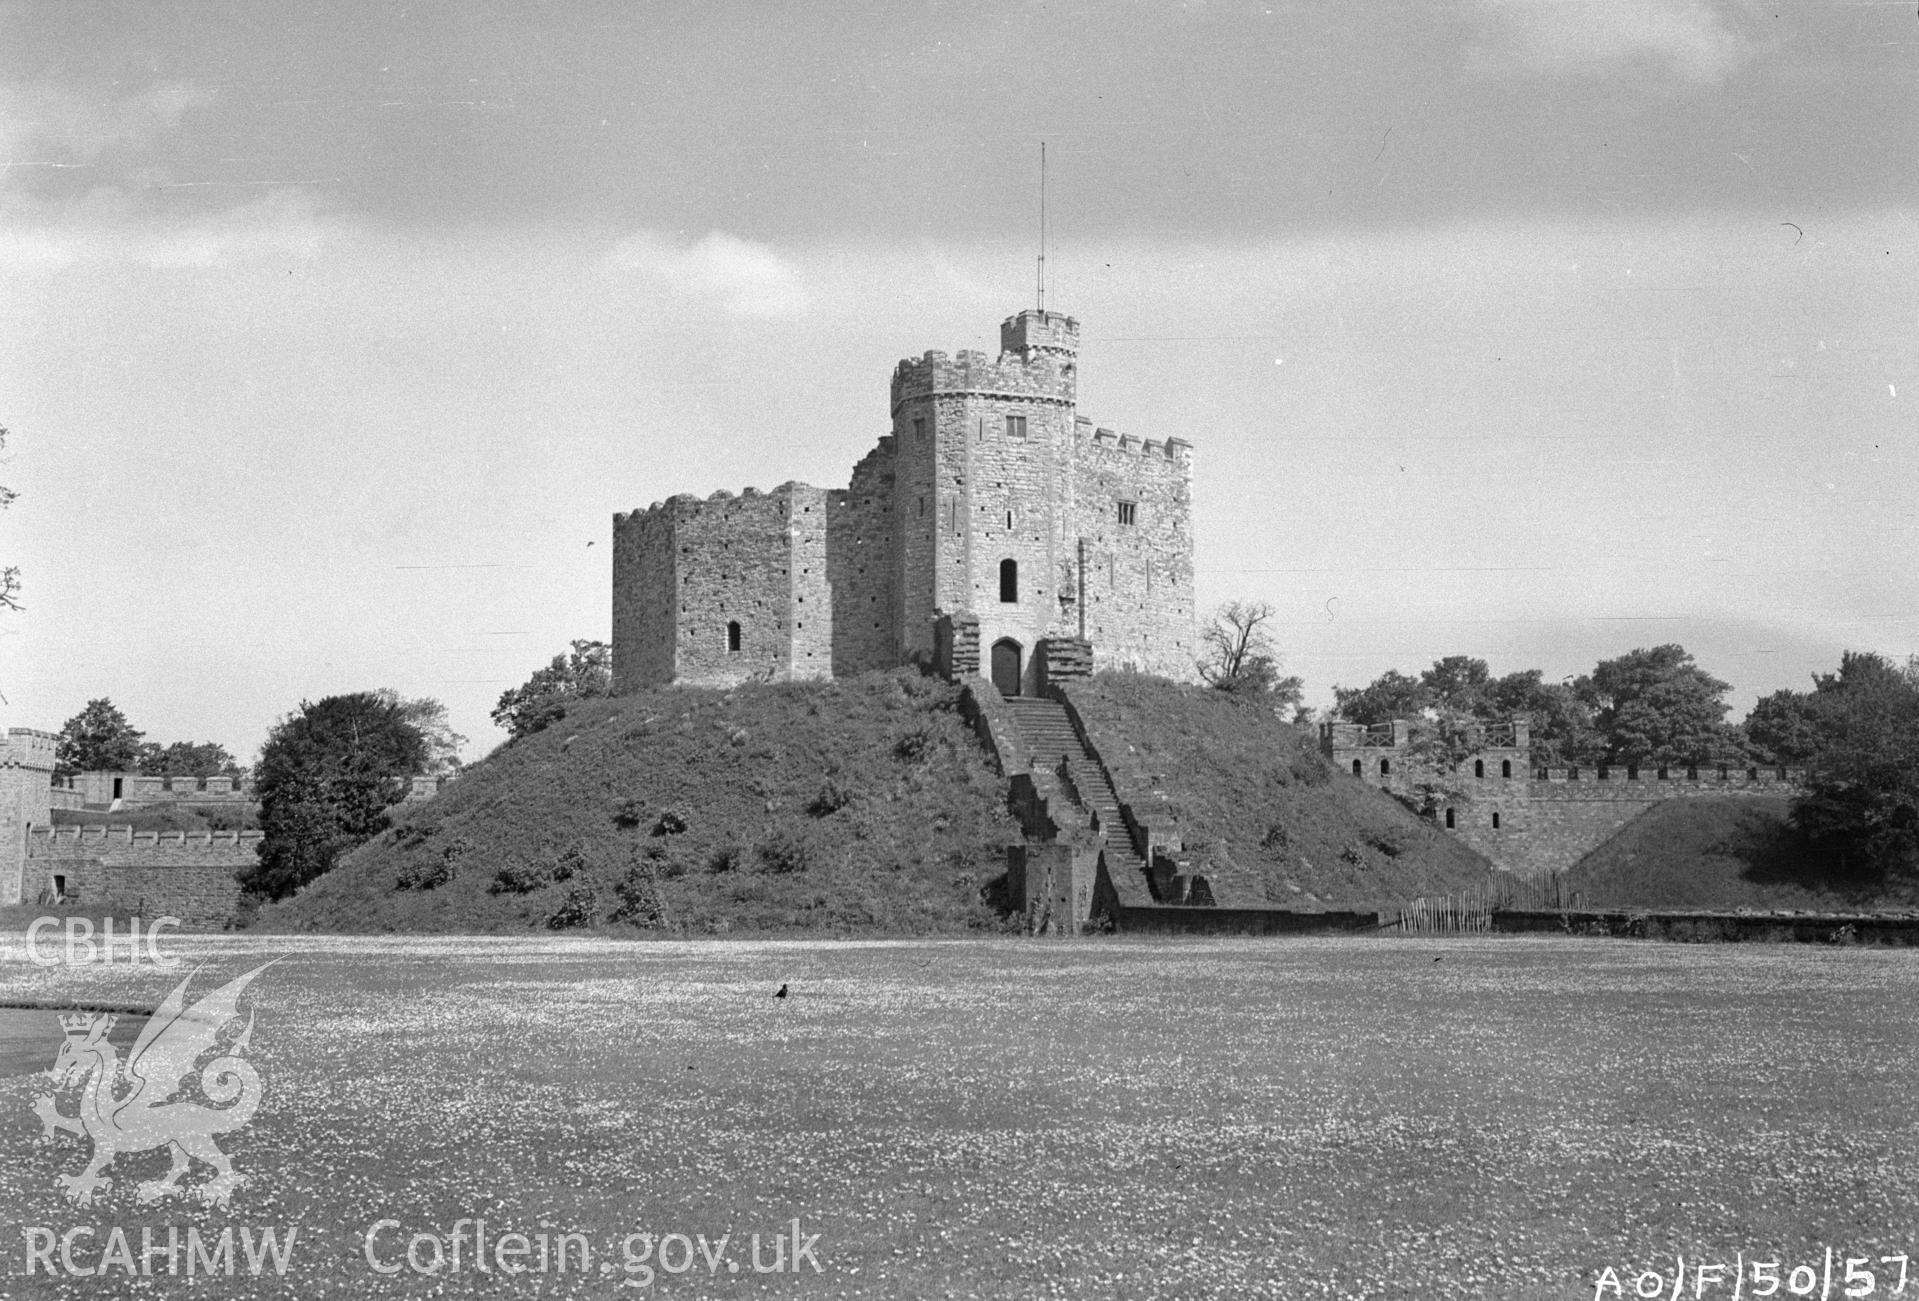 Digital copy of a nitrate negative showing a view of Cardiff Castle, taken by Ordnance Survey.